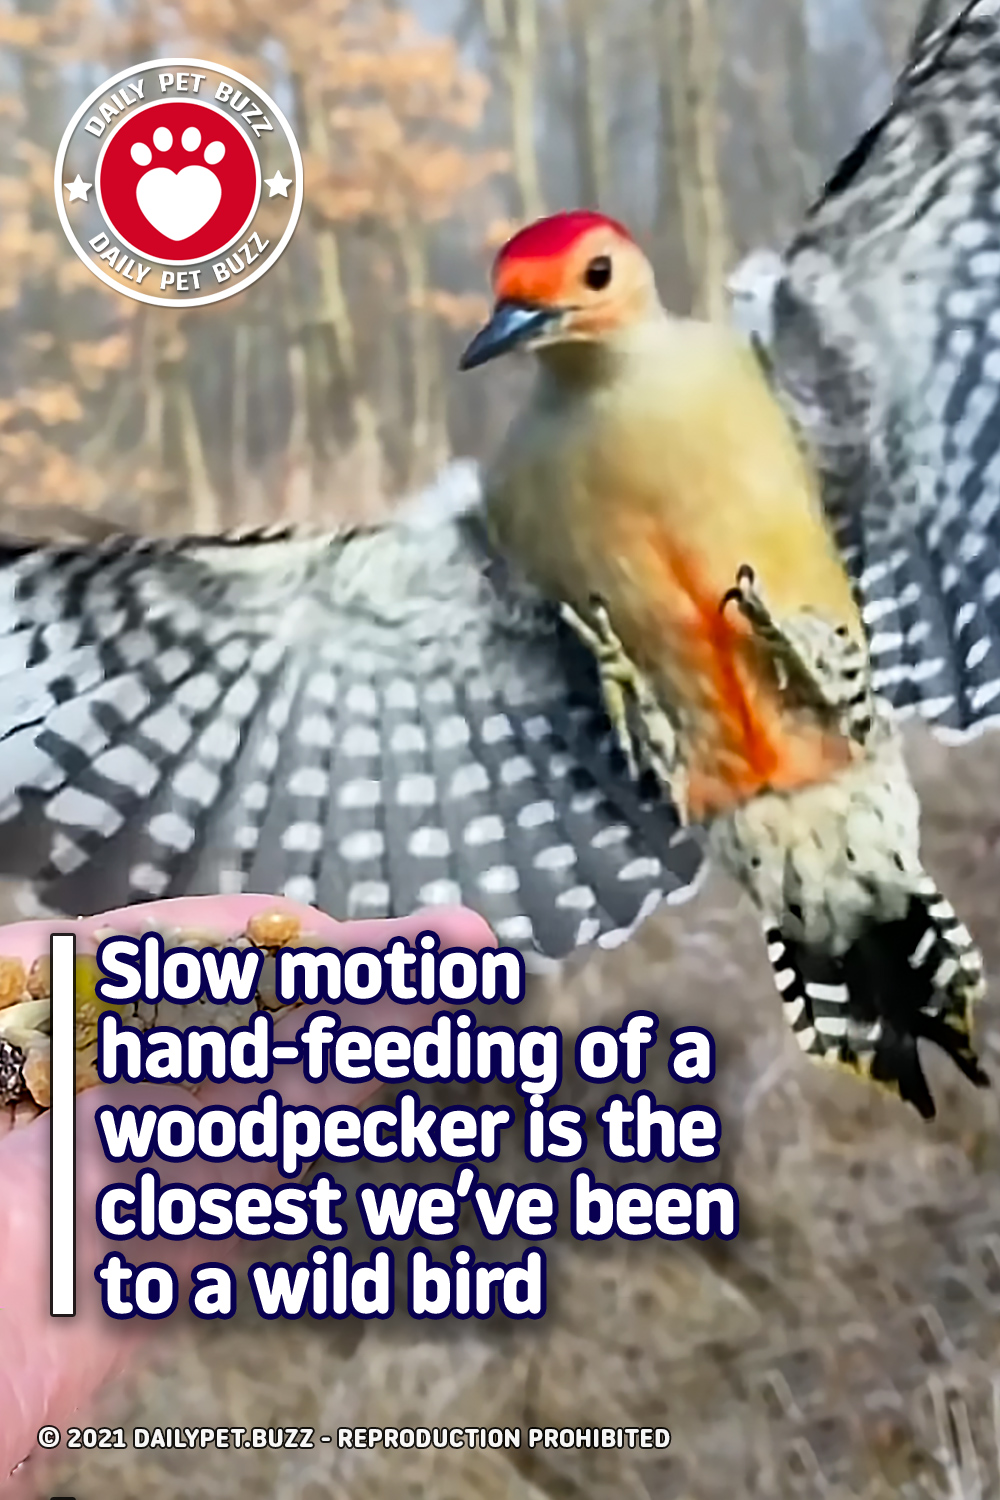 Slow motion hand-feeding of a woodpecker is the closest we’ve been to a wild bird